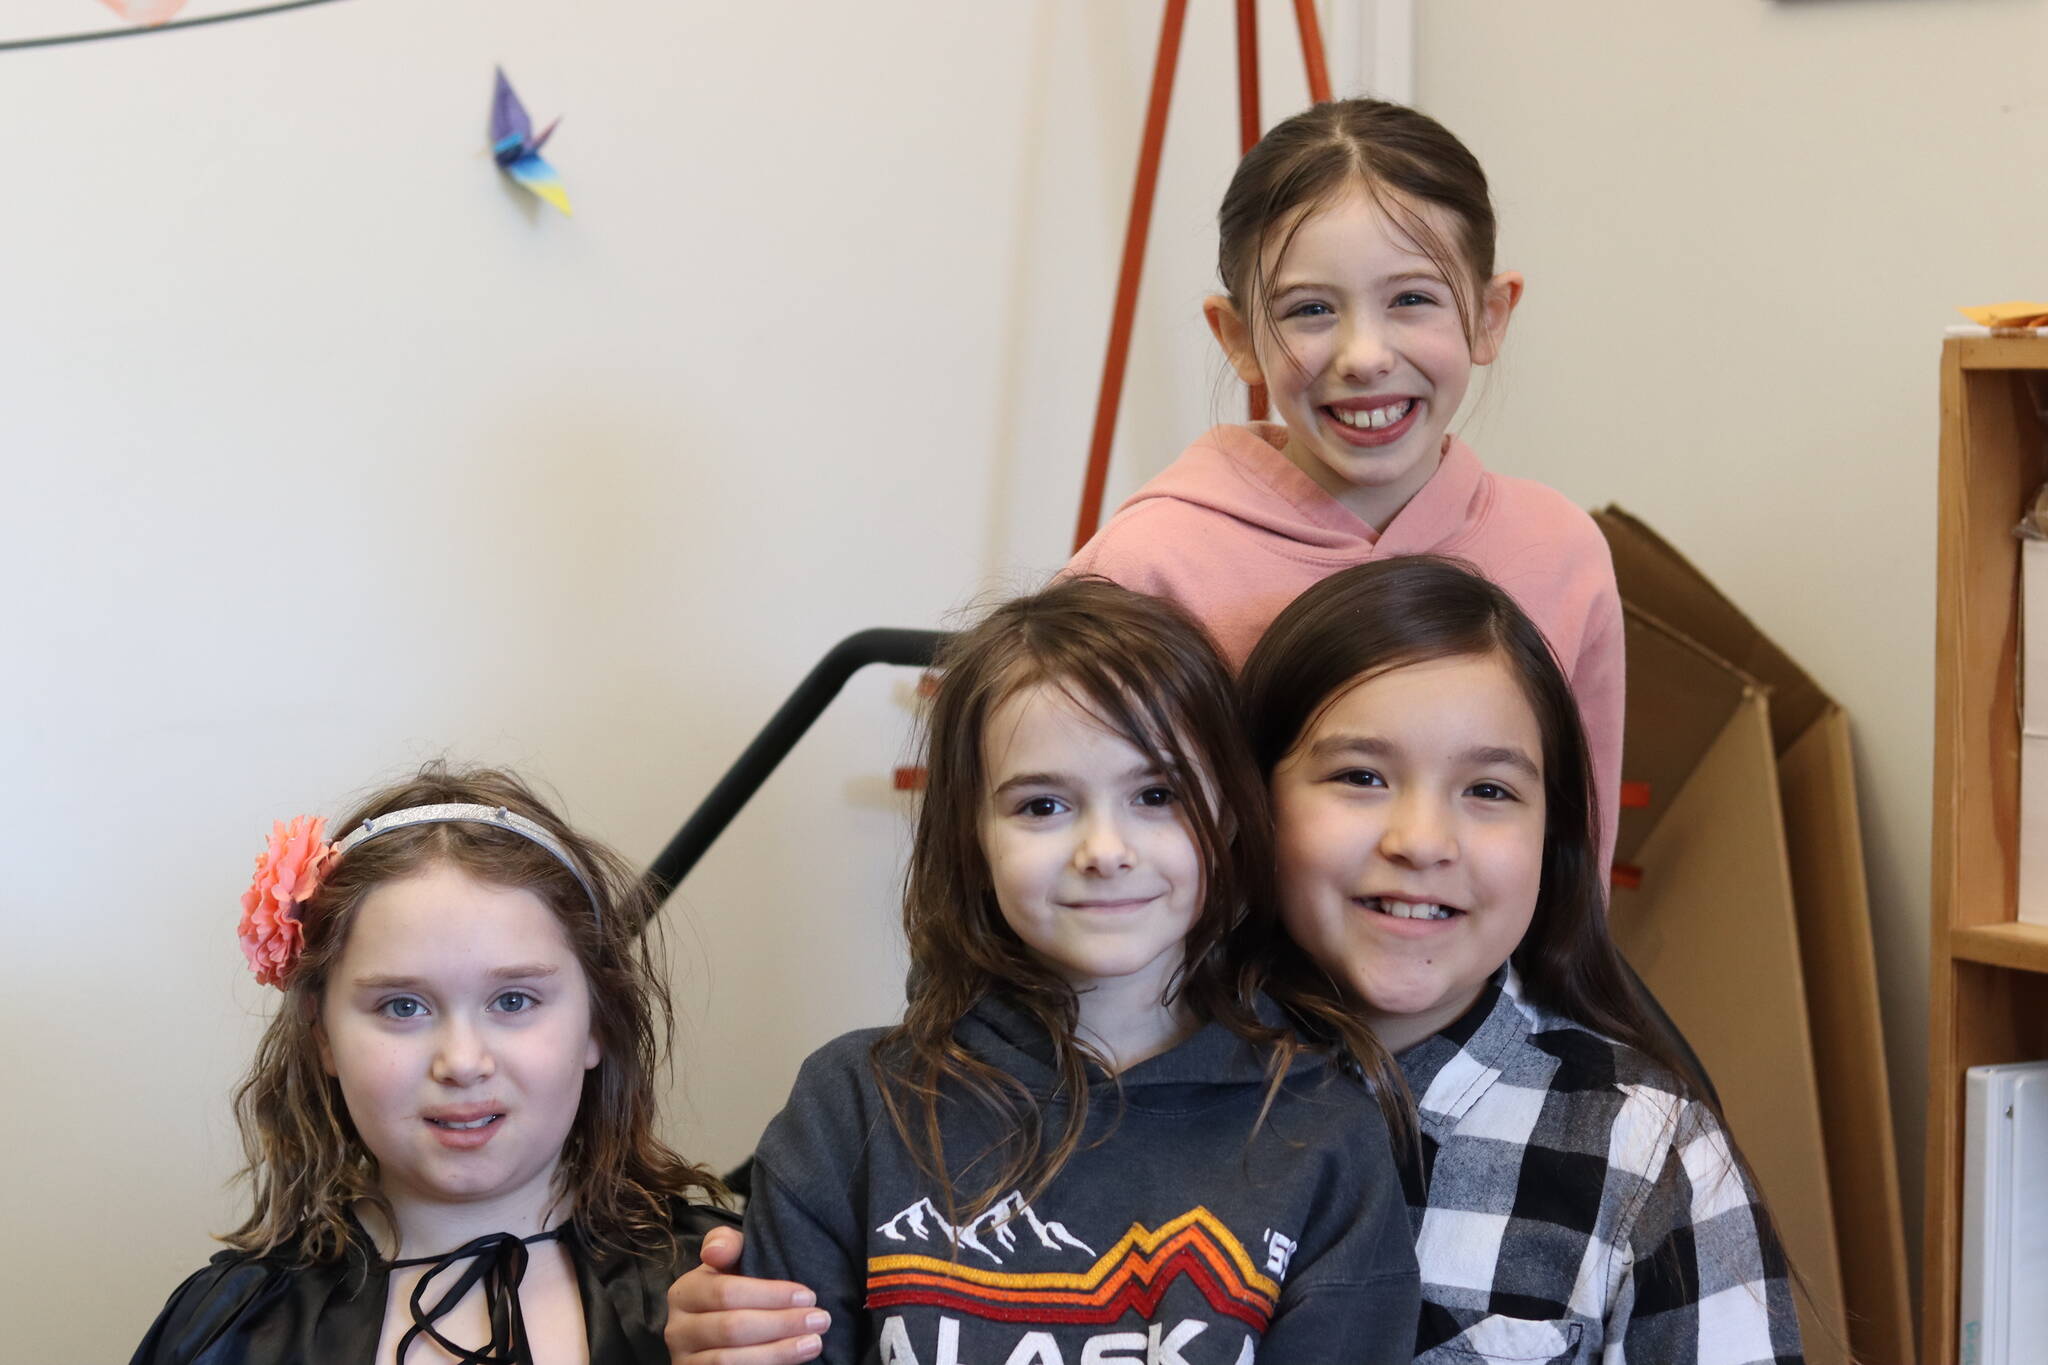 Left to right, Lilah Gaguine, Maddie Lesh, Lyndley Nakamura and Hallie Reid (top) are all smiles after taking 10th place in this year’s Battle of the Books competition on Thursday at Borealis Elementary School via phone conference. (Jonson Kuhn / Juneau Empire)